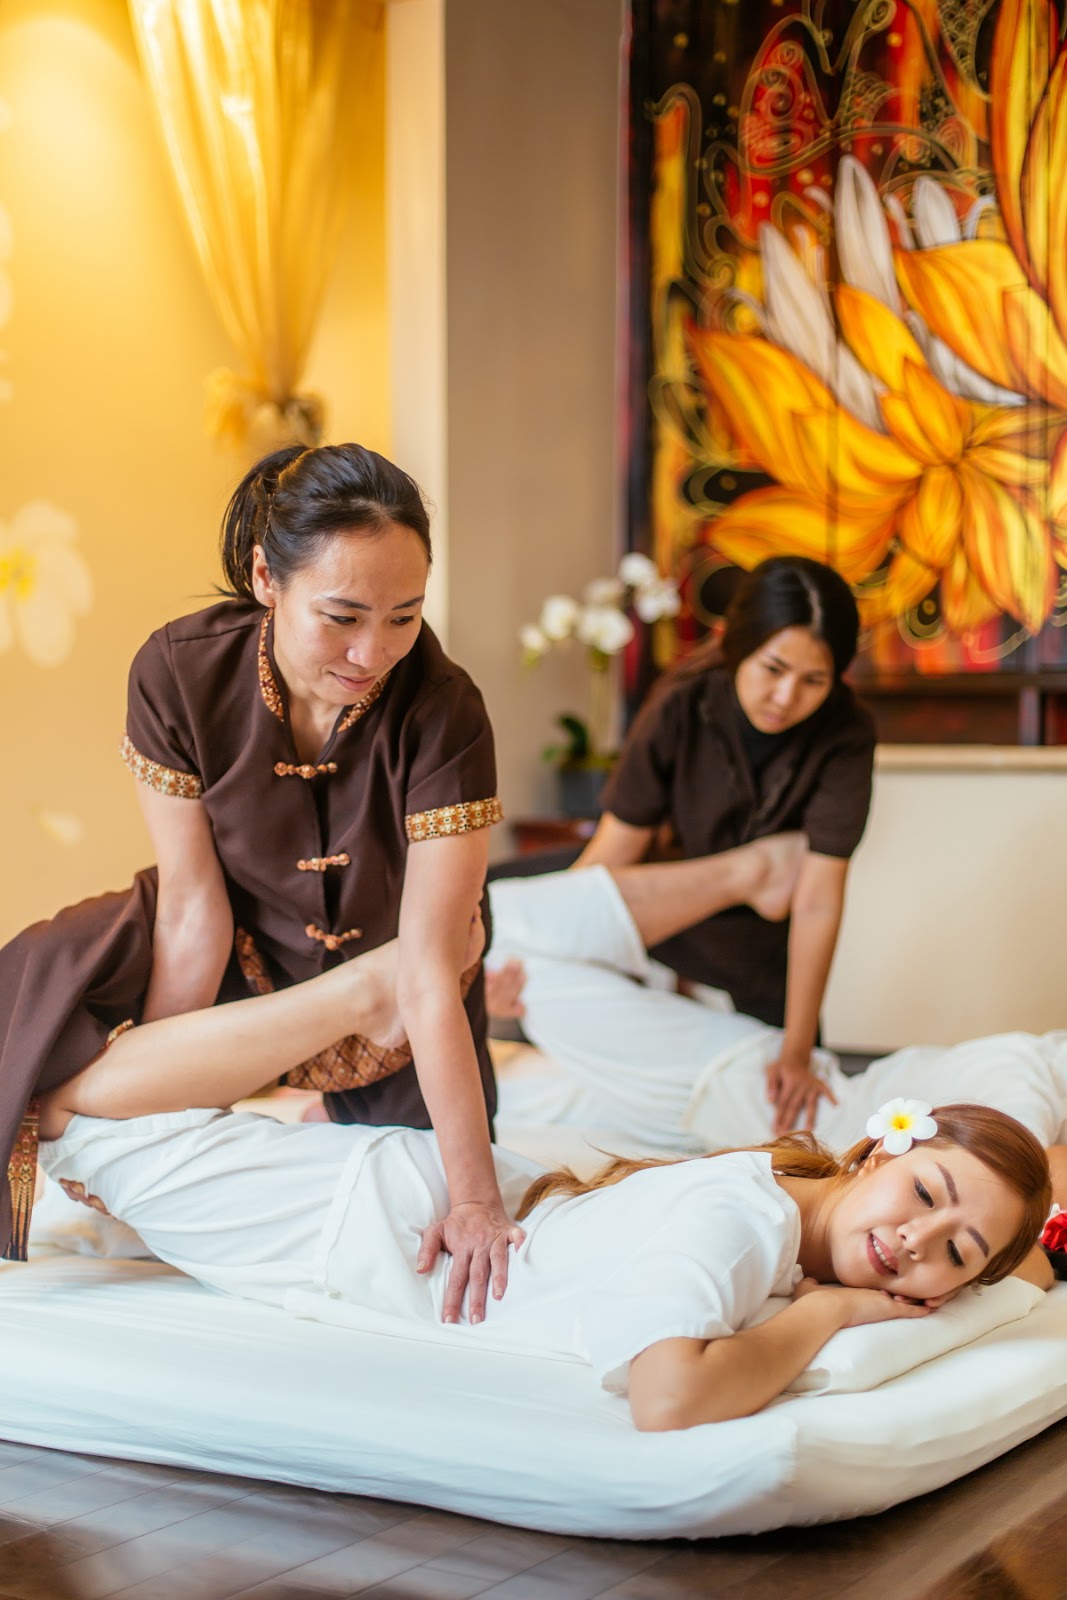 World Class Thai Spa In New York With The Best Treatment Fifth Ave Thai Spa 1212 644 8239